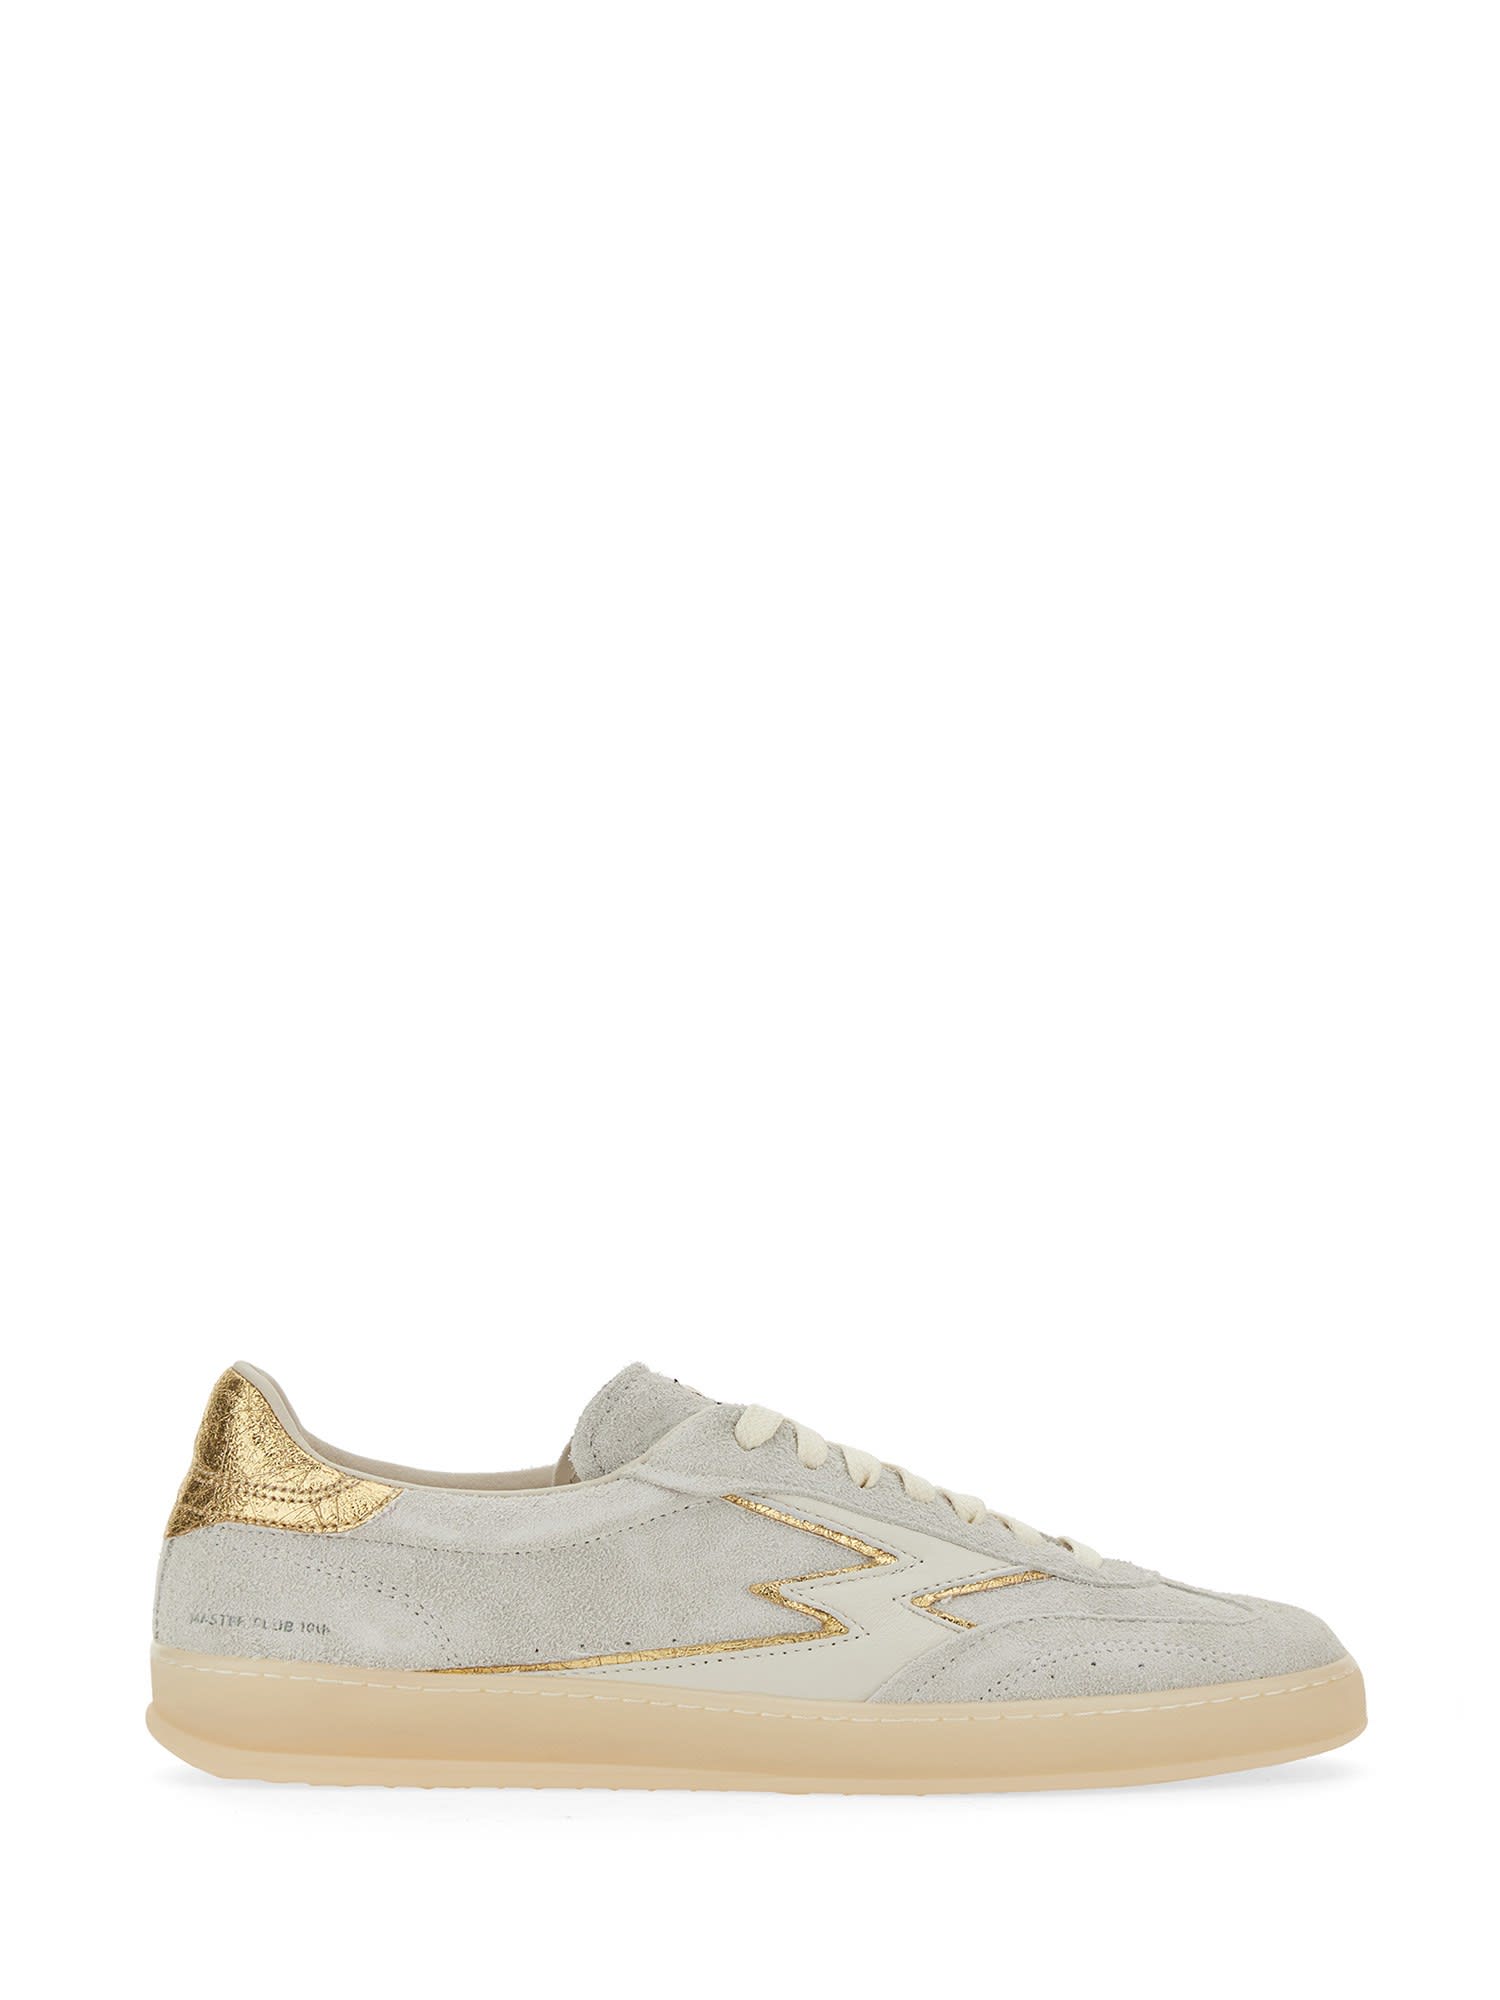 M.O.A. master of arts Suede club Sneakers